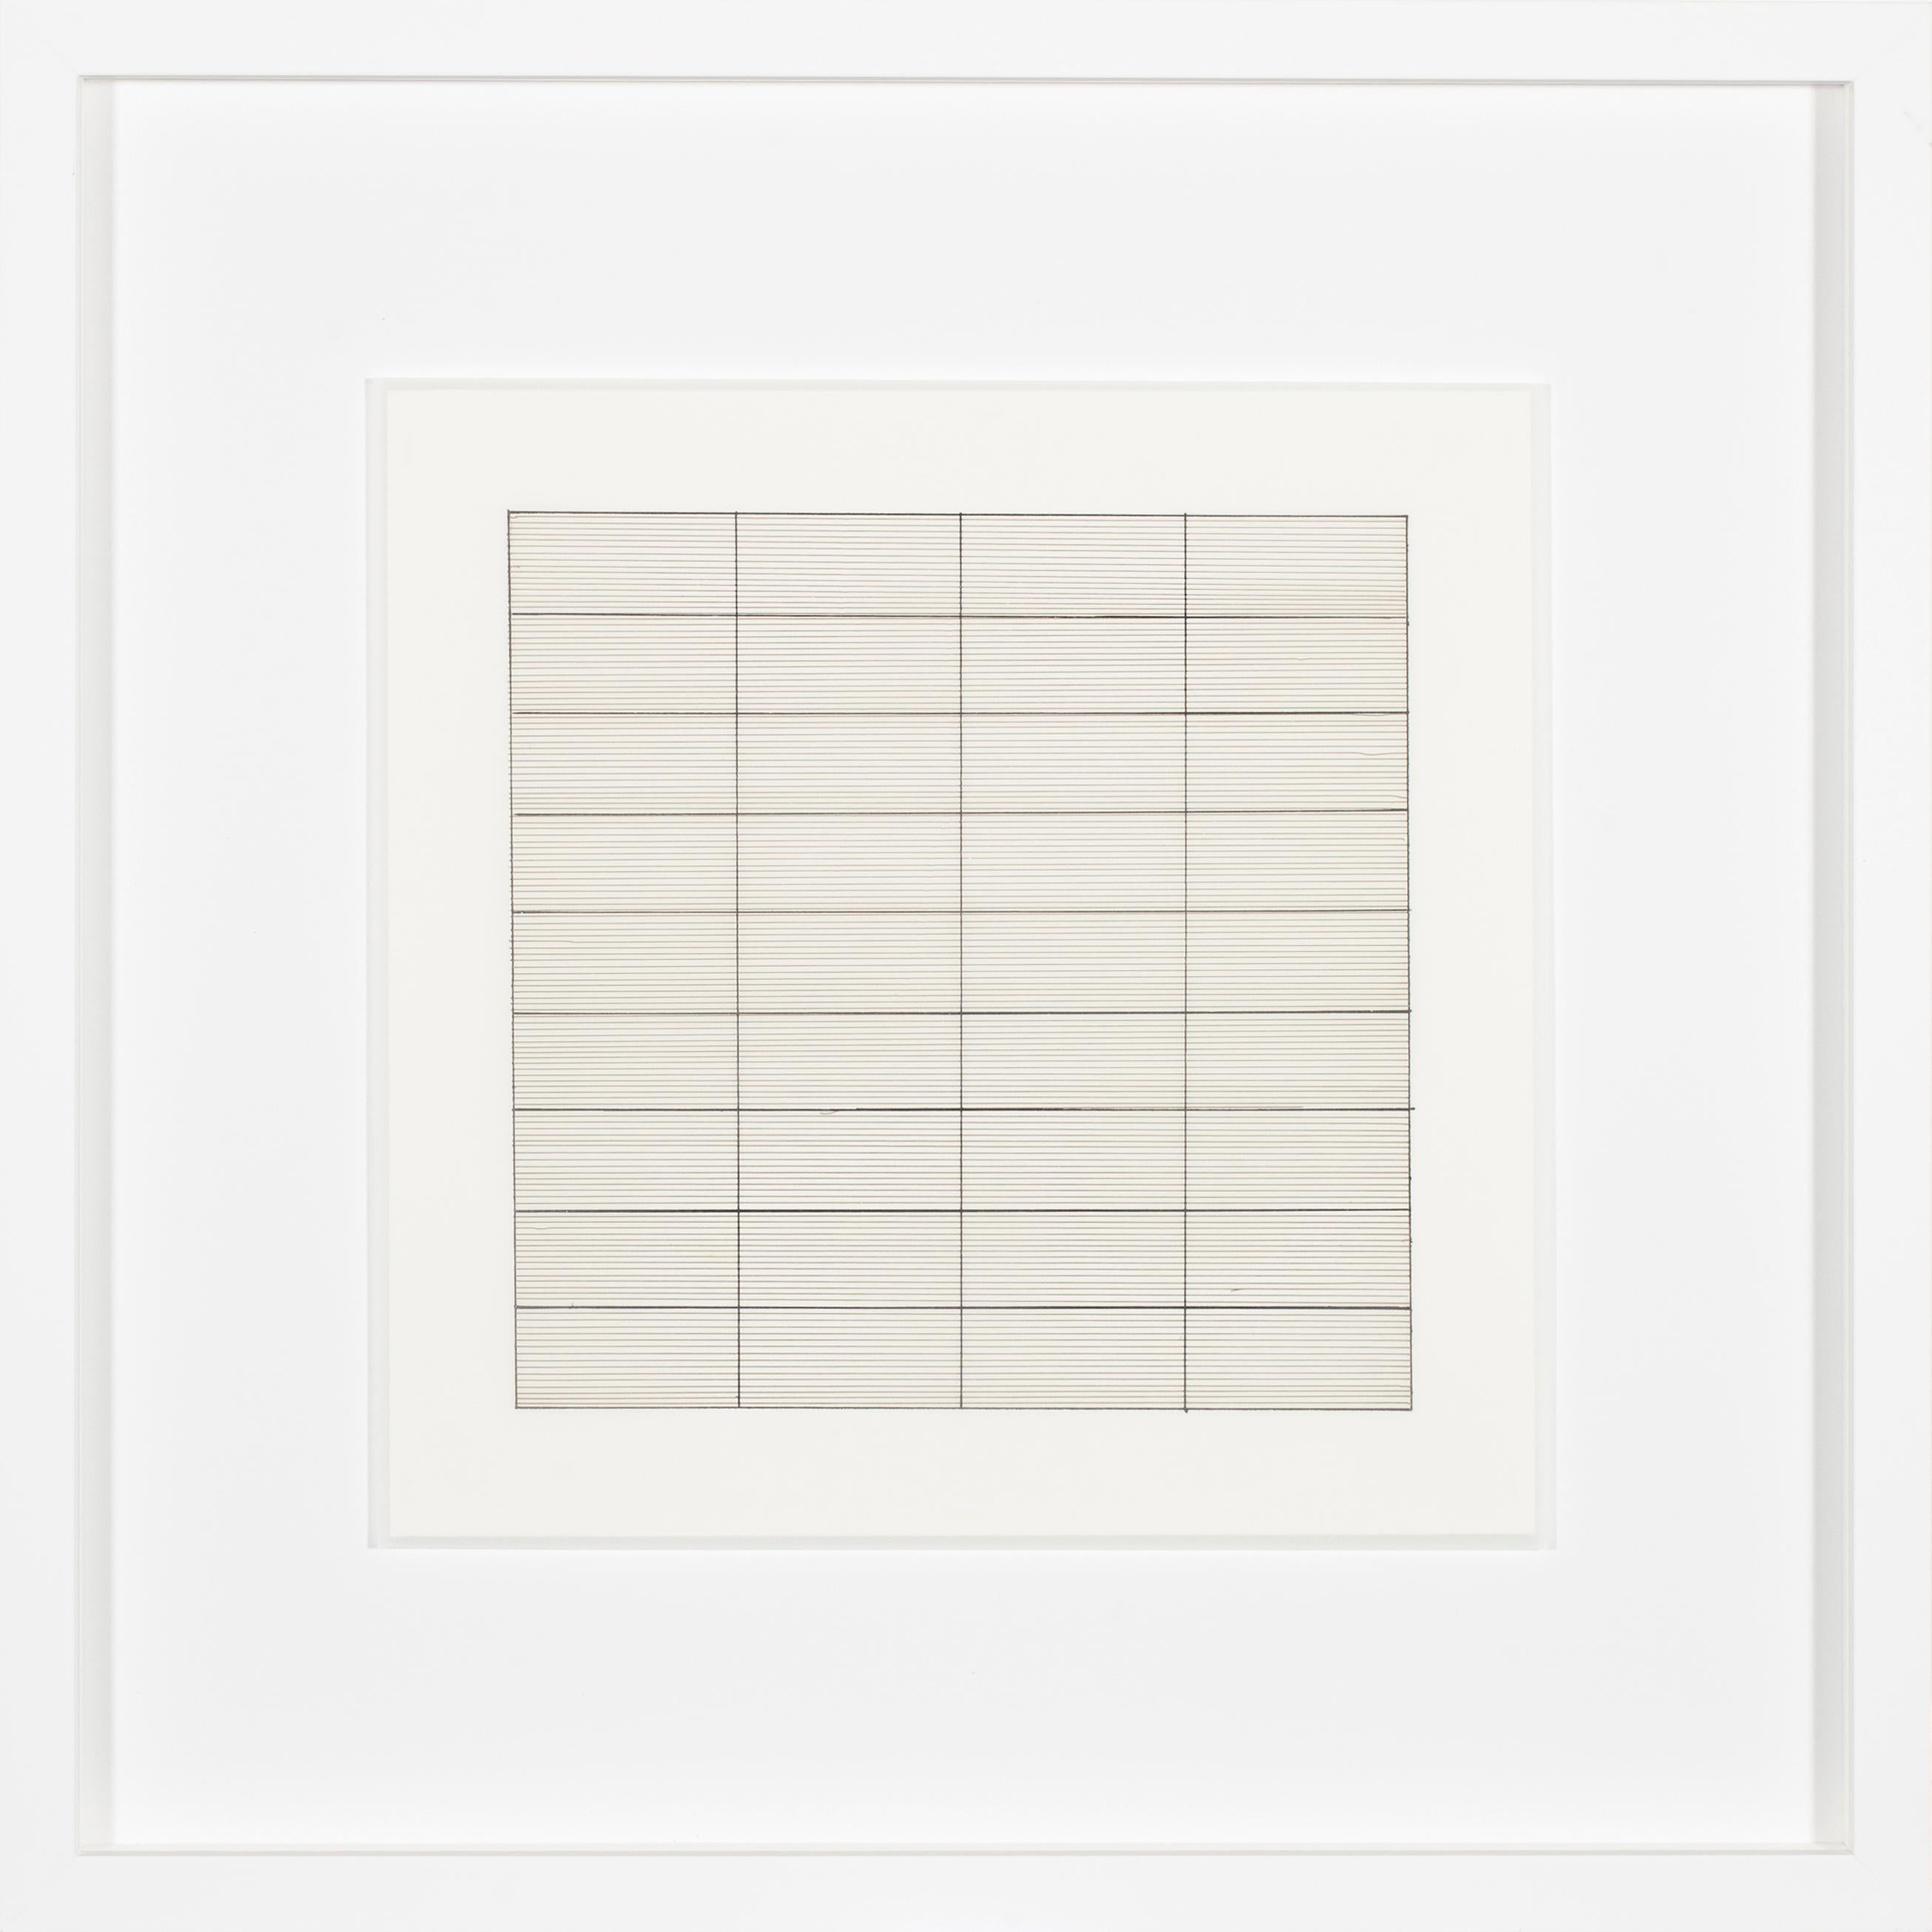 Why did Agnes Martin paint?